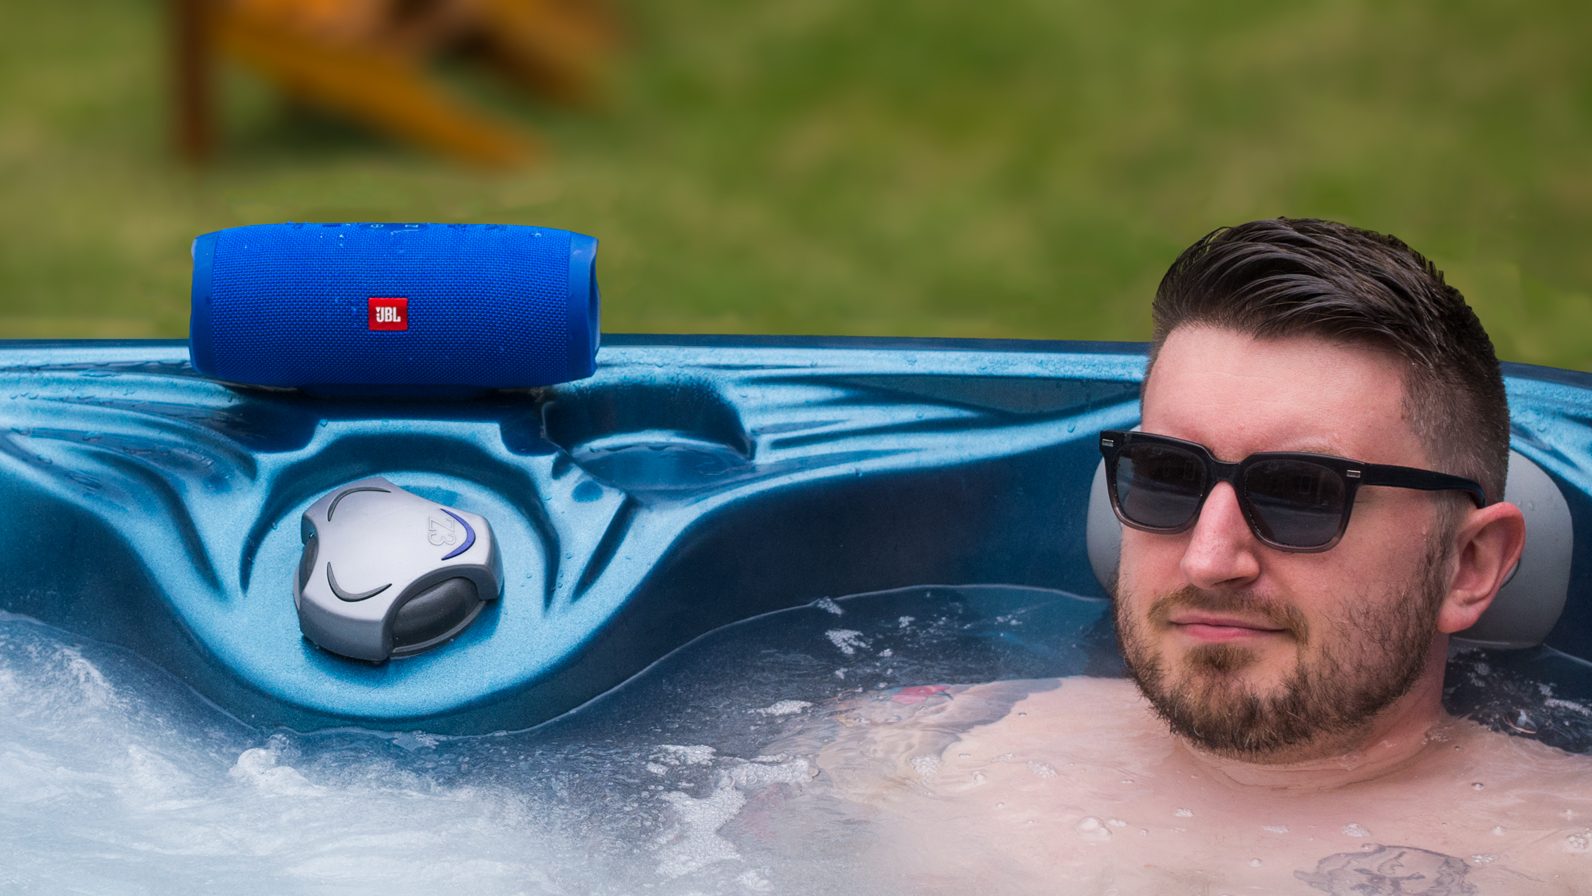 The JBL Charge 3 in use near a hot tub.